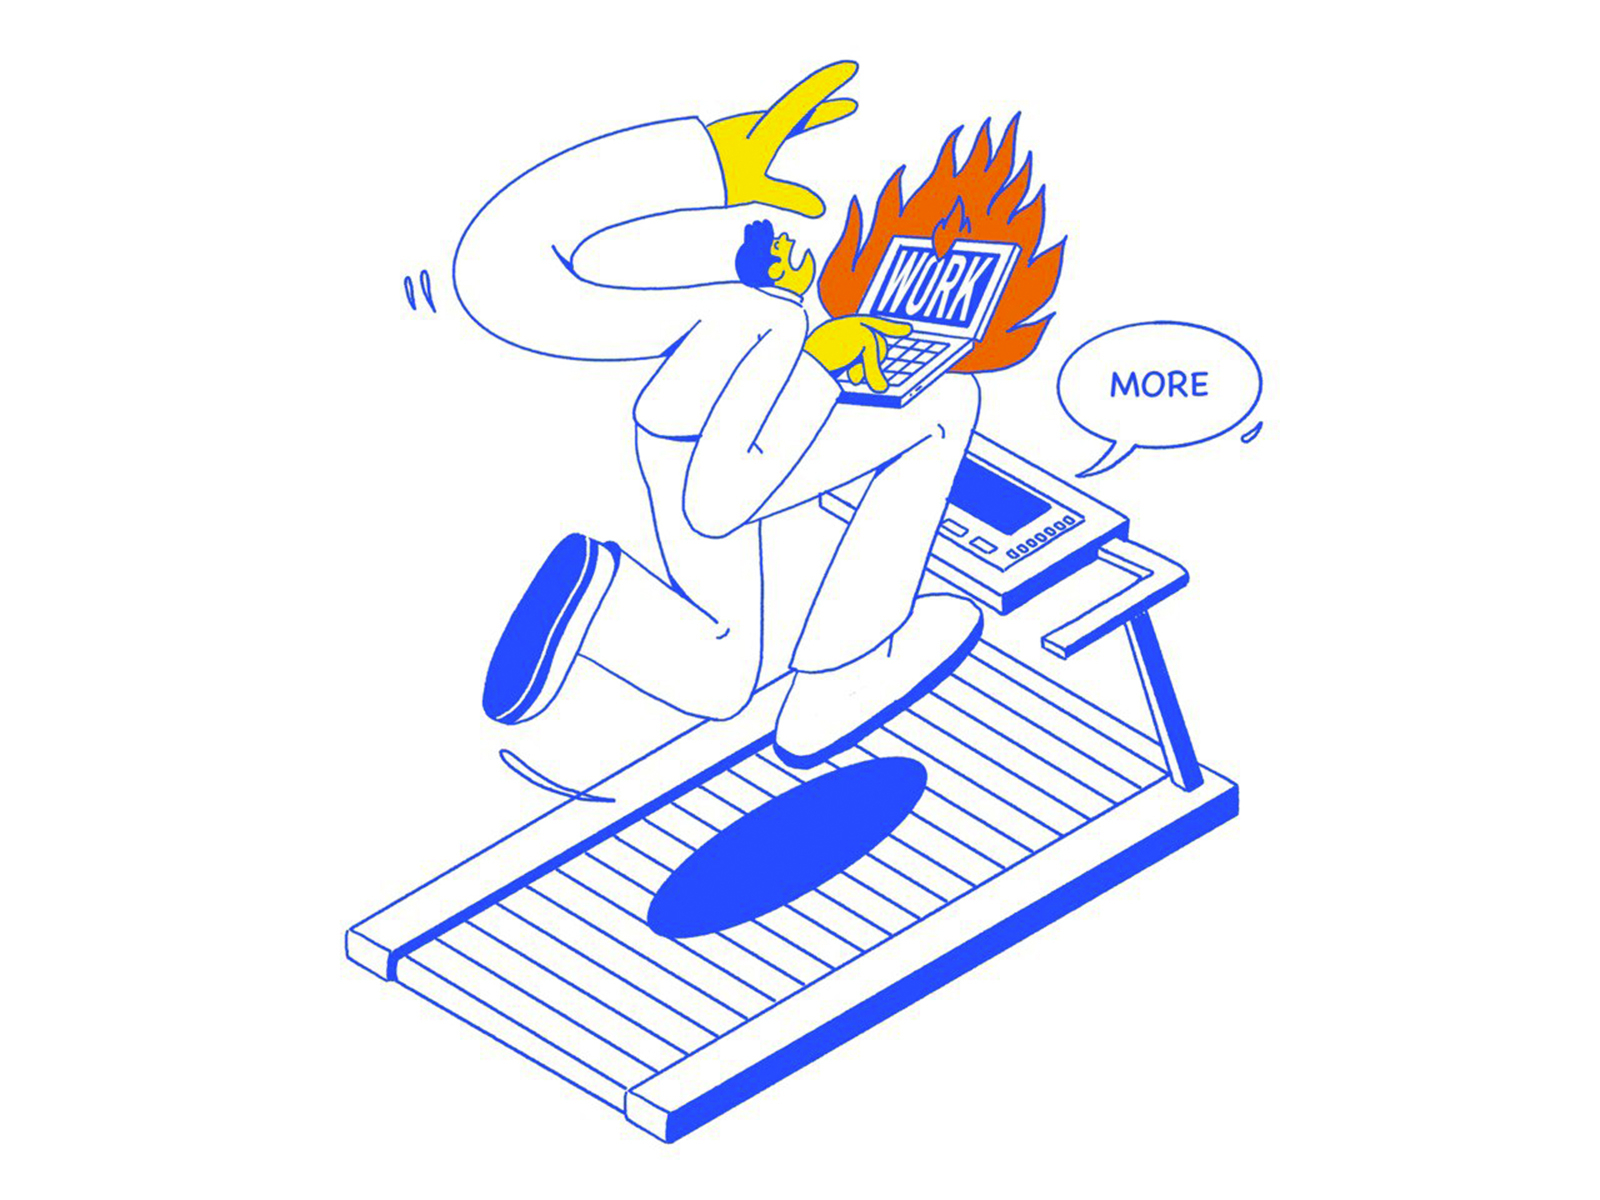 More! 2021 character character design drawing fire illustration more office web website work